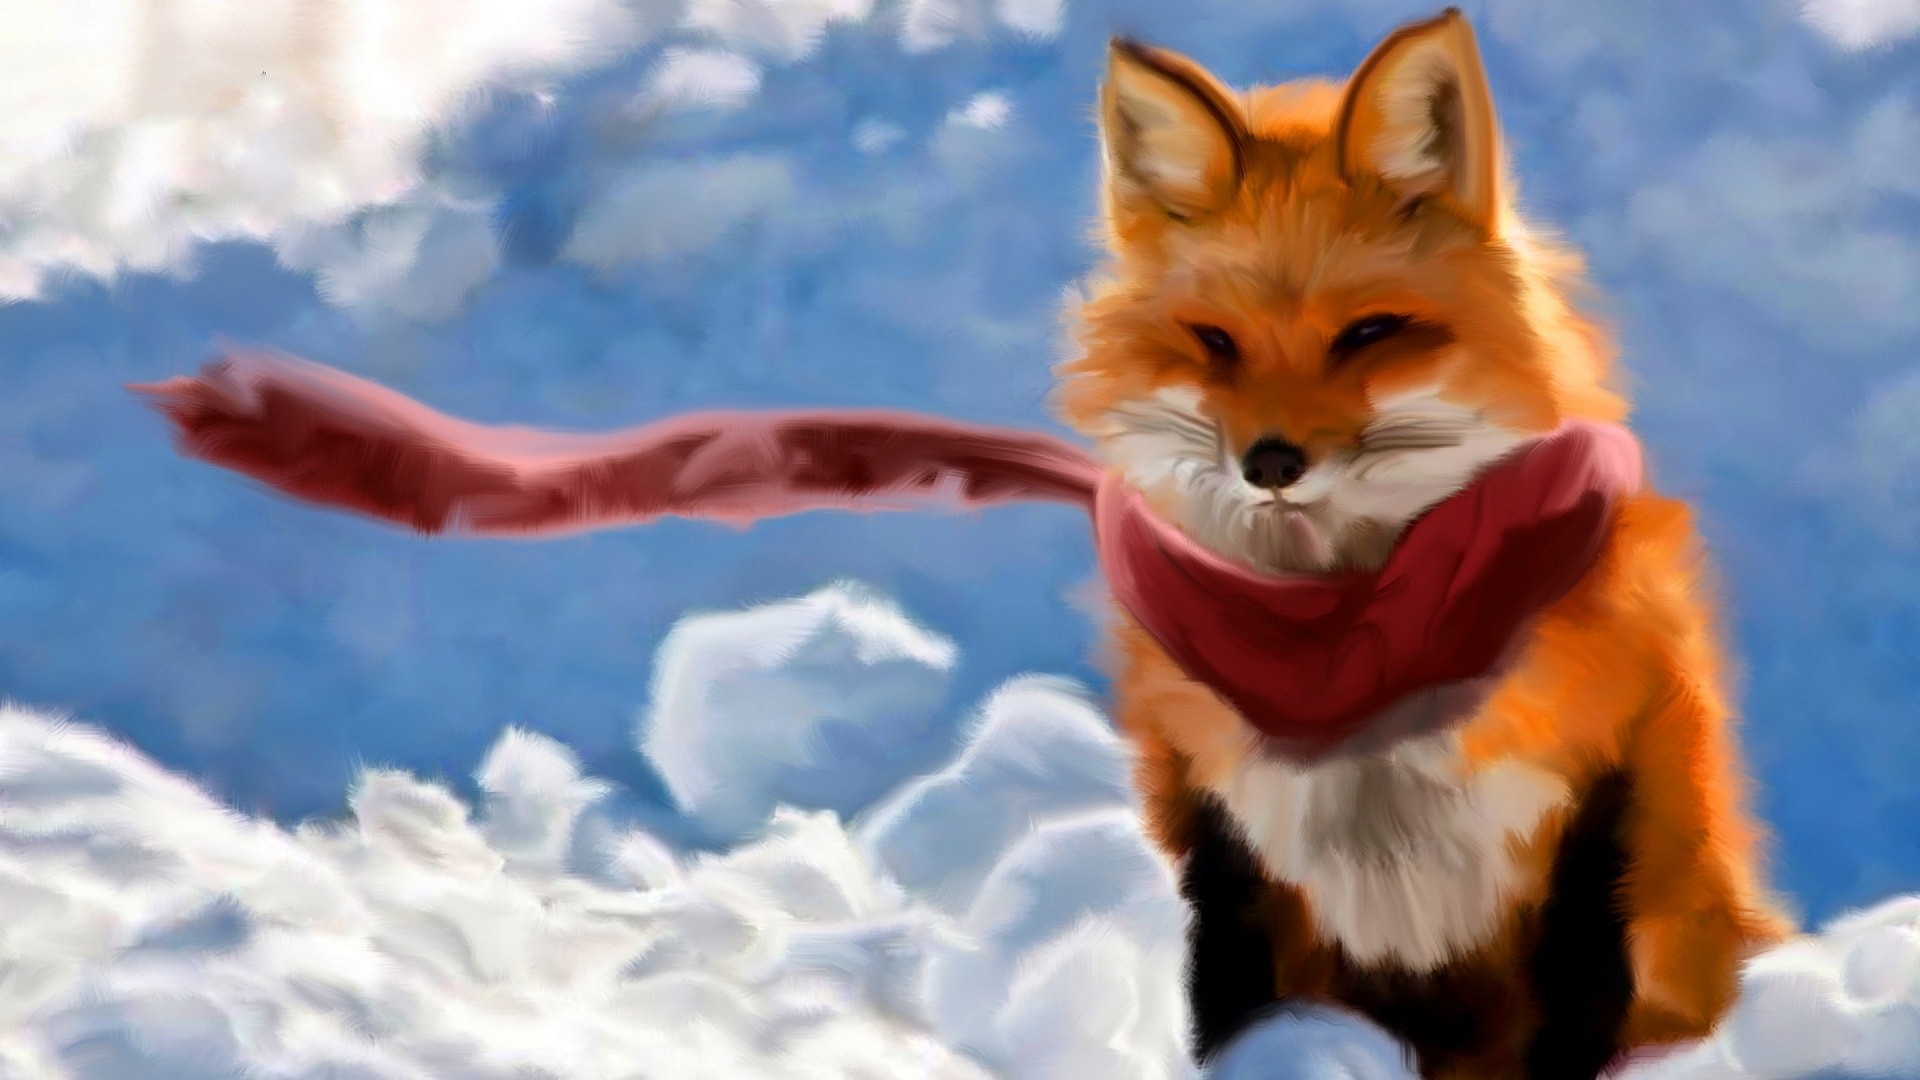 1920x1080 623 Fox HD Wallpapers | Backgrounds - Wallpaper Abyss ...